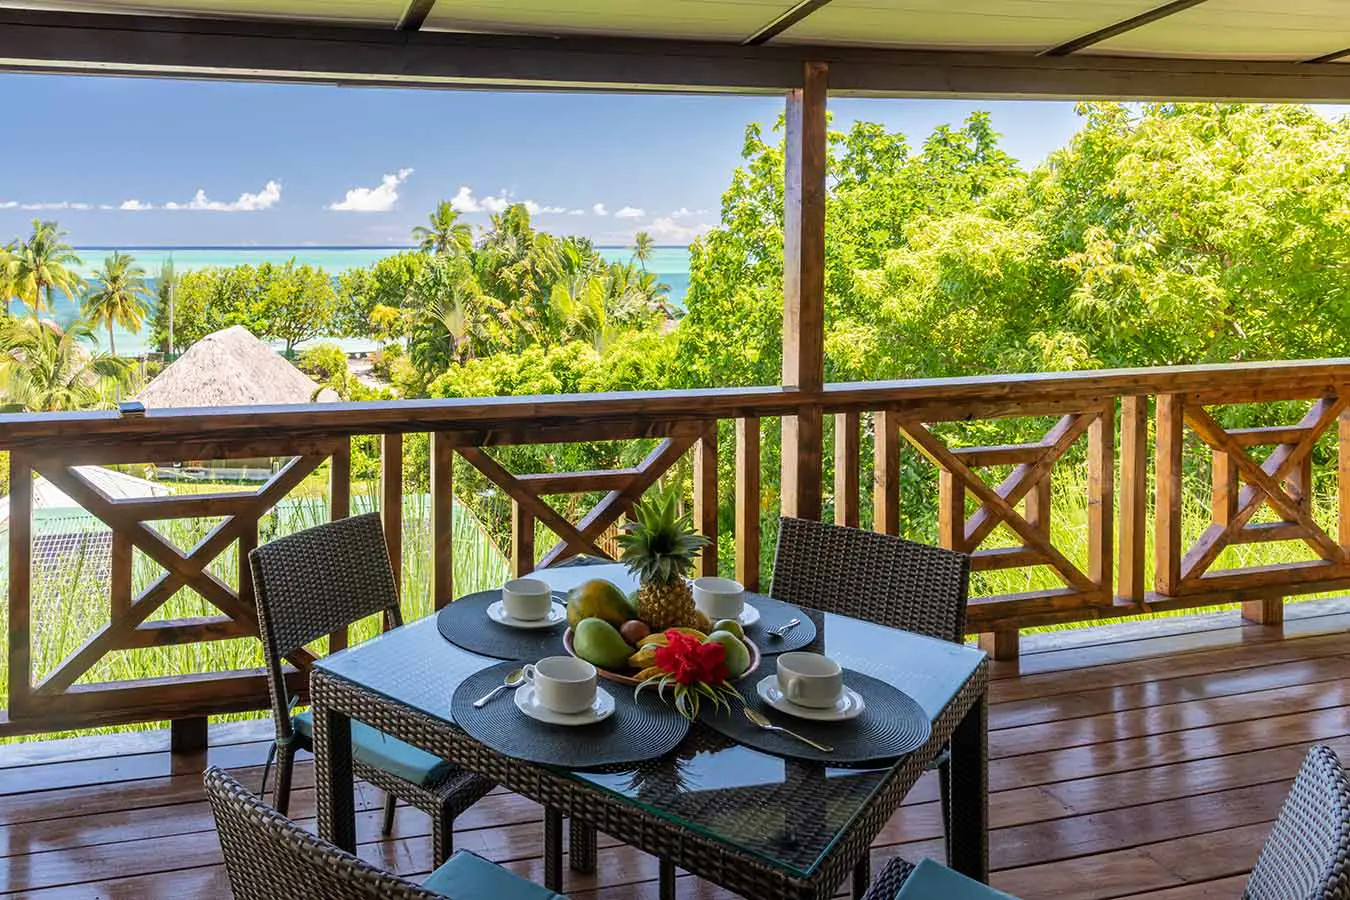 Dining table on the terrace with a view of the lagoon in our Bora Bora vacation home